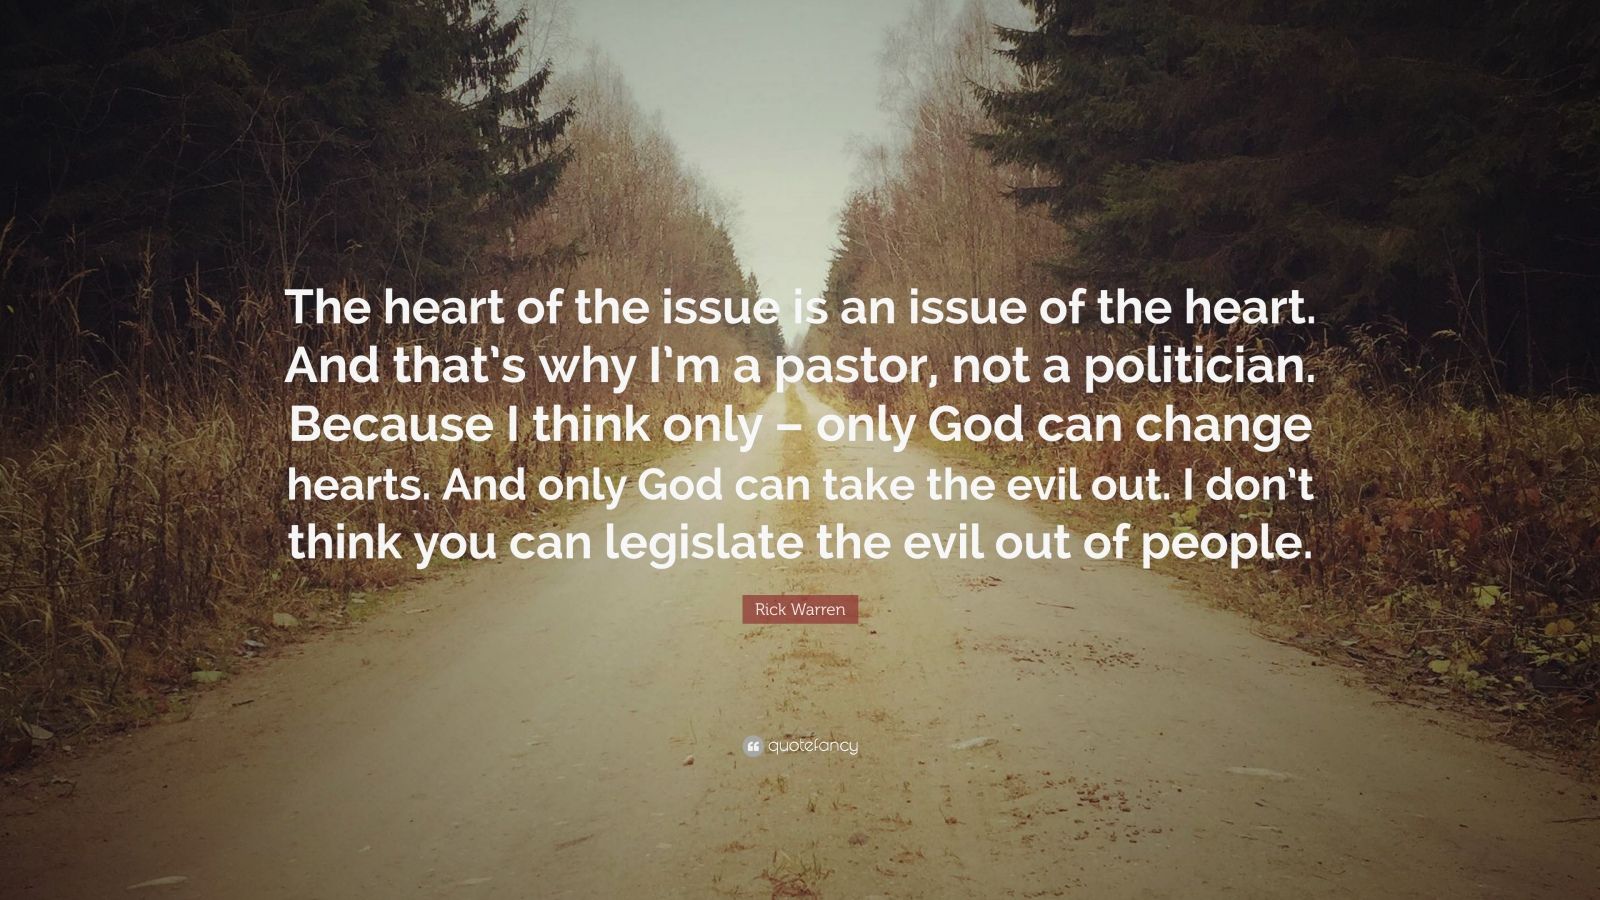 Rick Warren Quote: “The heart of the issue is an issue of the heart